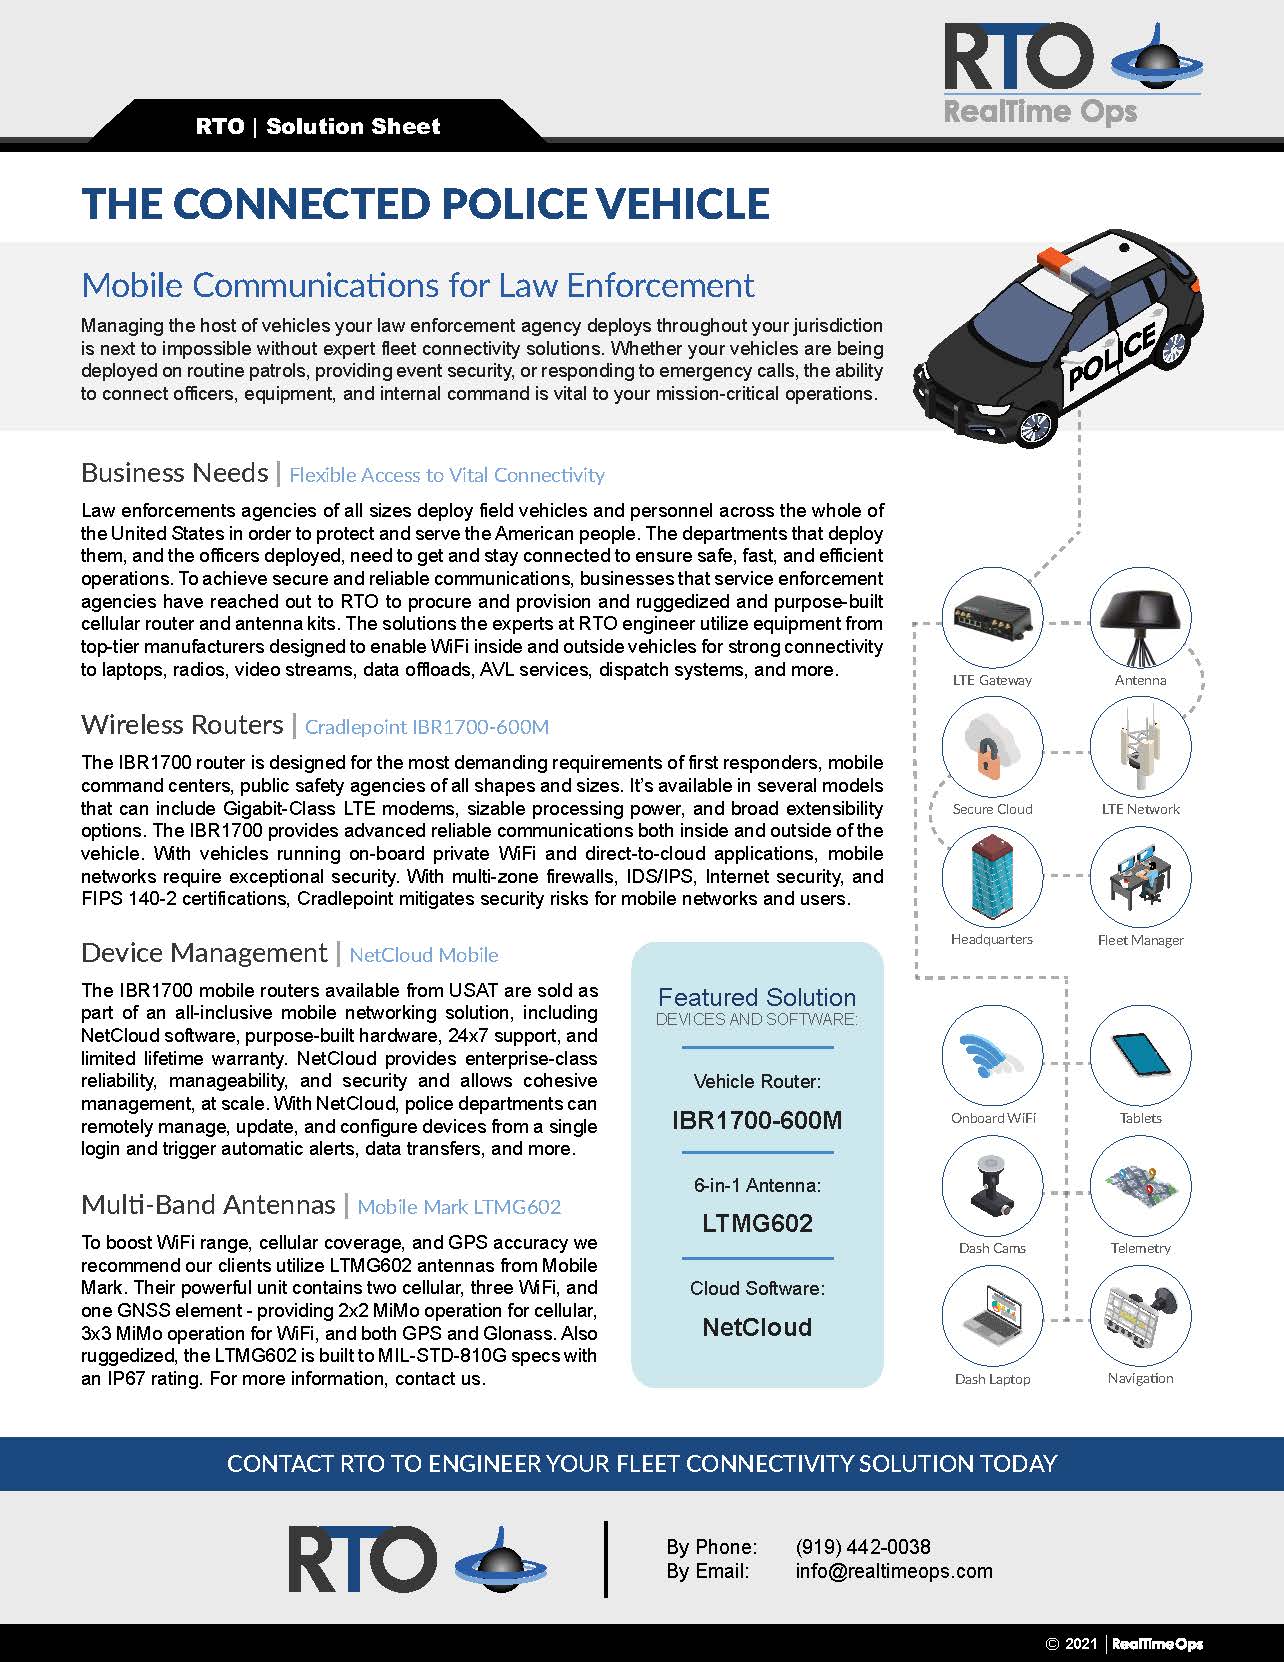 Police Vehicle Connectivity